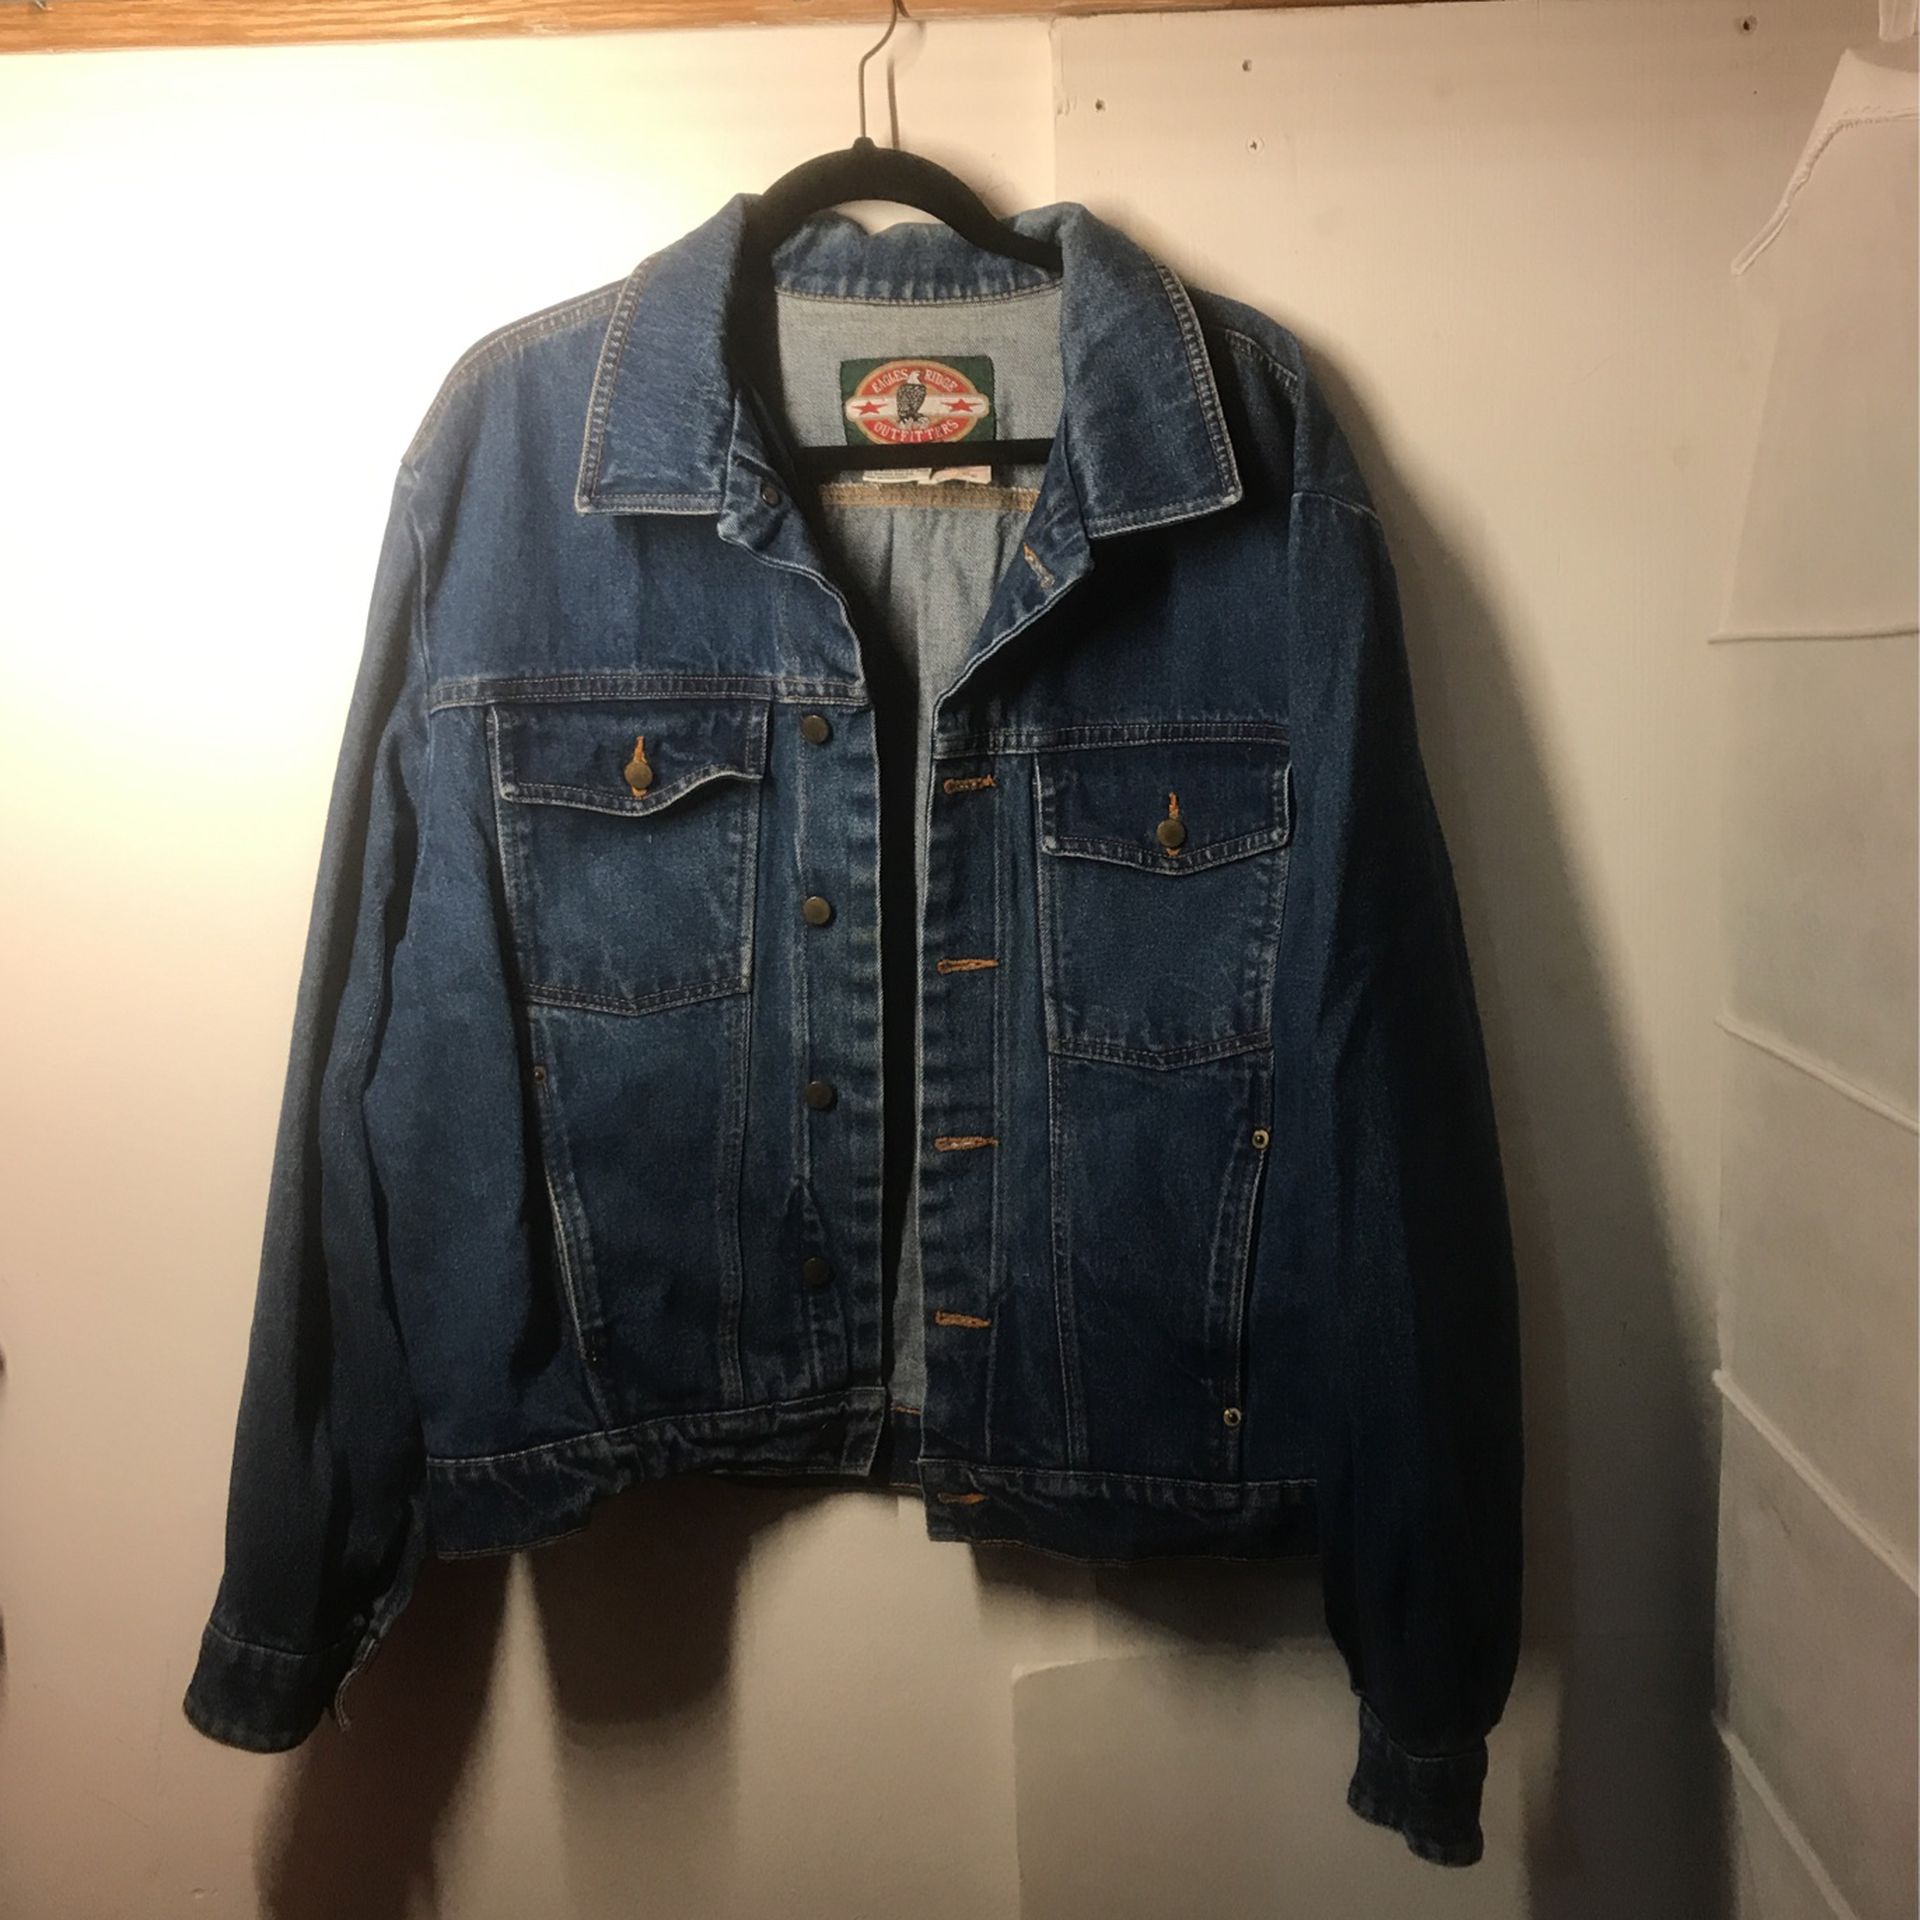 Eagles Ridge outfitters jean jacket size large